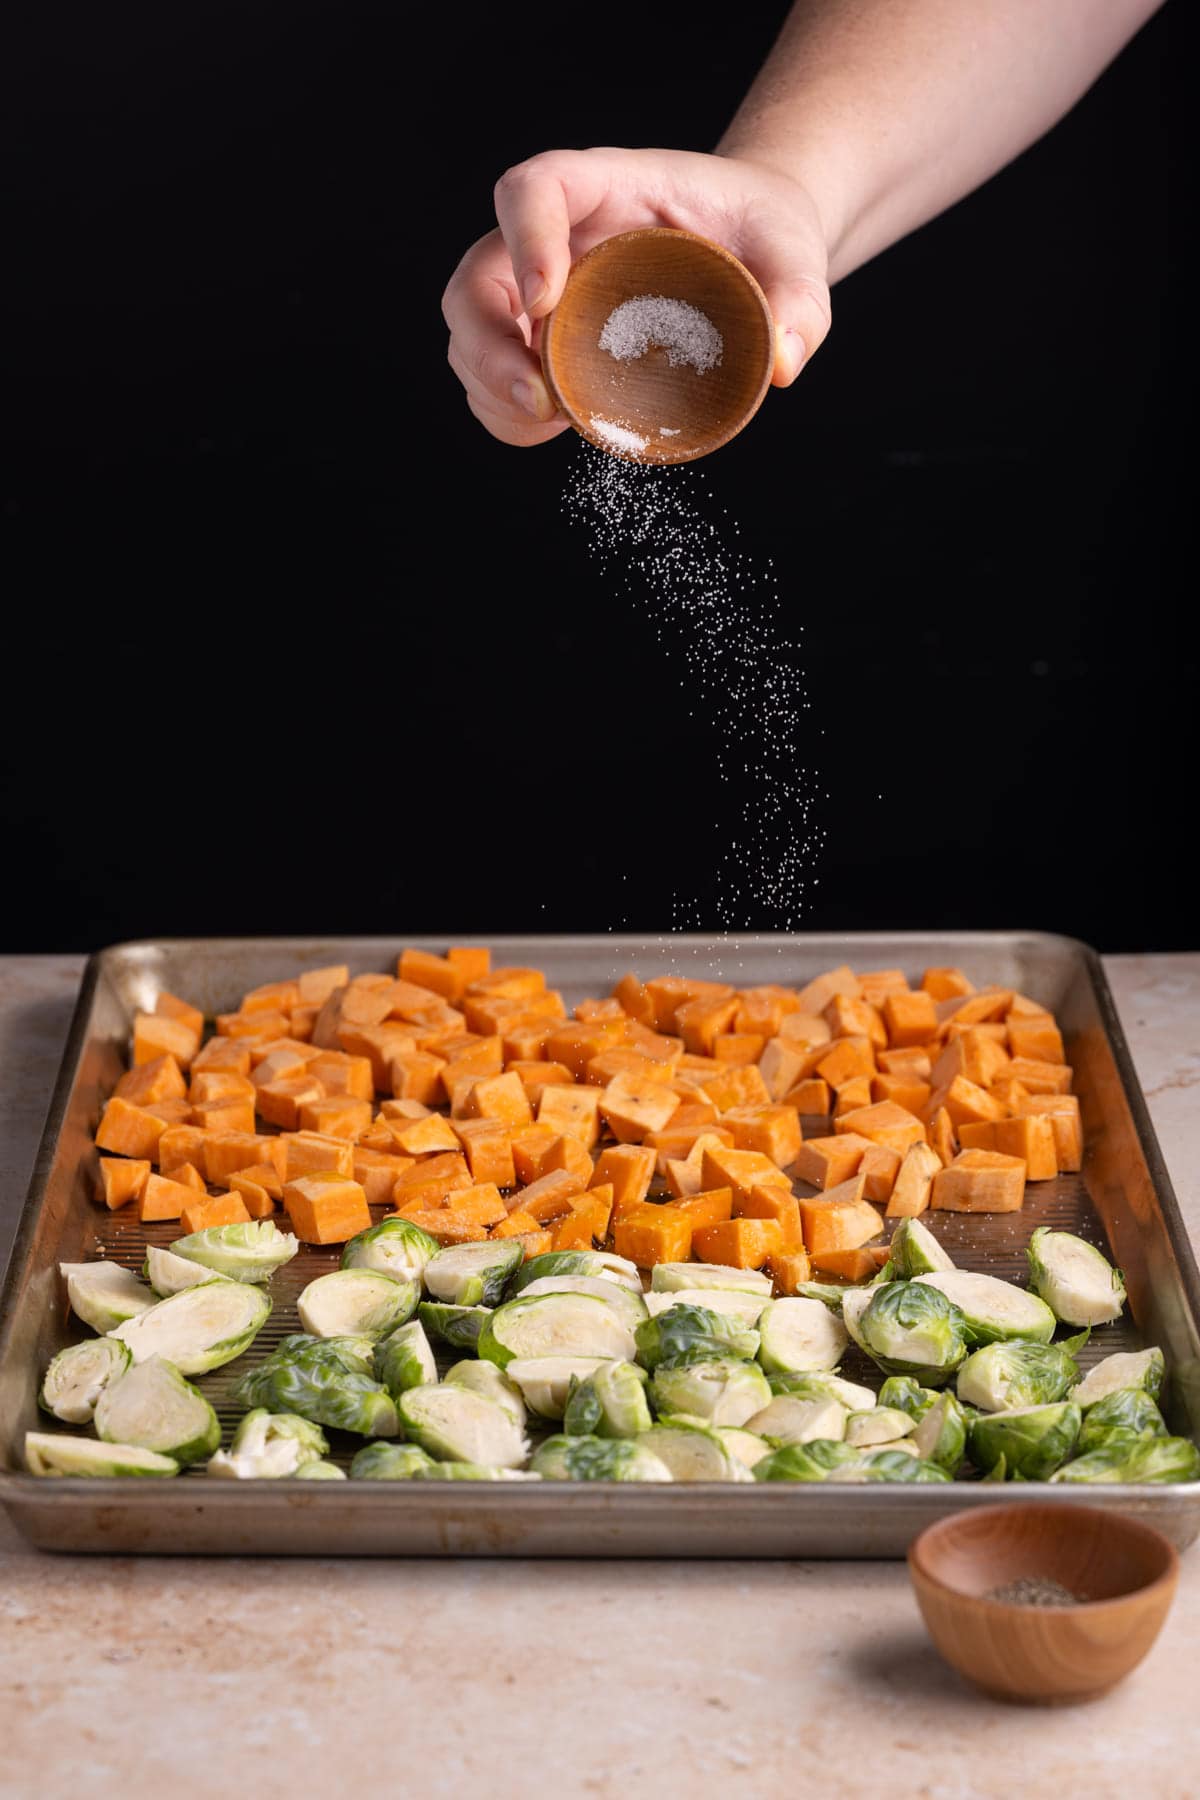 Sprinkling salt on top of brussels sprouts and sweet potatoes on a baking tray